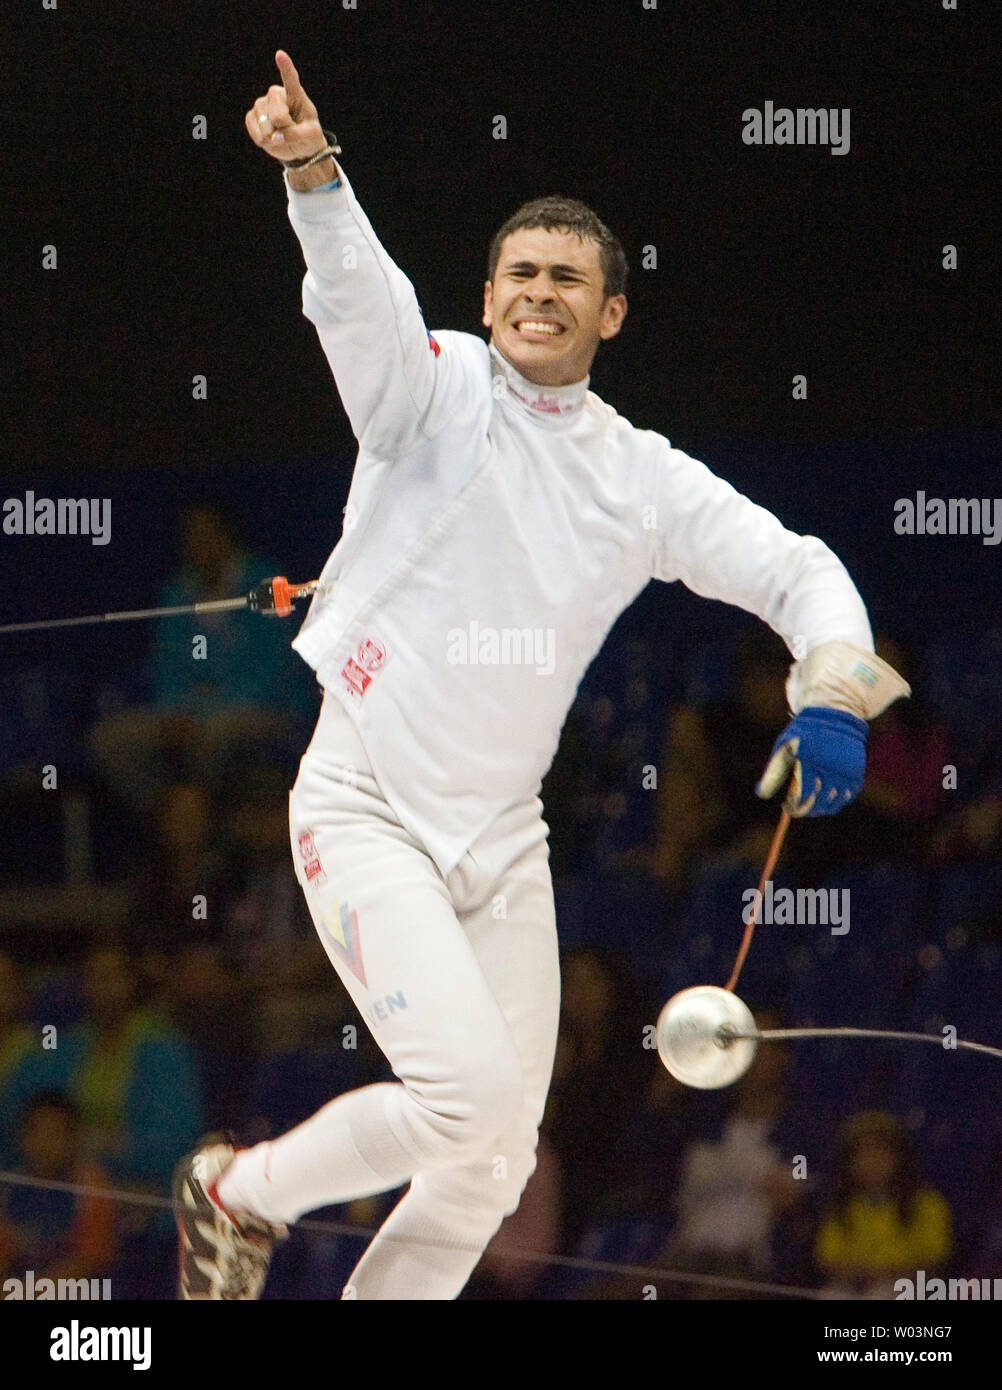 Venezuela's Reuben Limardo celebrates after beating Cuba's Andres Carrillo 11-10 in overtime, winning gold in men's individual epee at Riocentro during the 2007 Pan Am Games in Rio de Janeiro, Brazil on July 16, 2007.   (UPI Photo/Heinz Ruckemann) Stock Photo